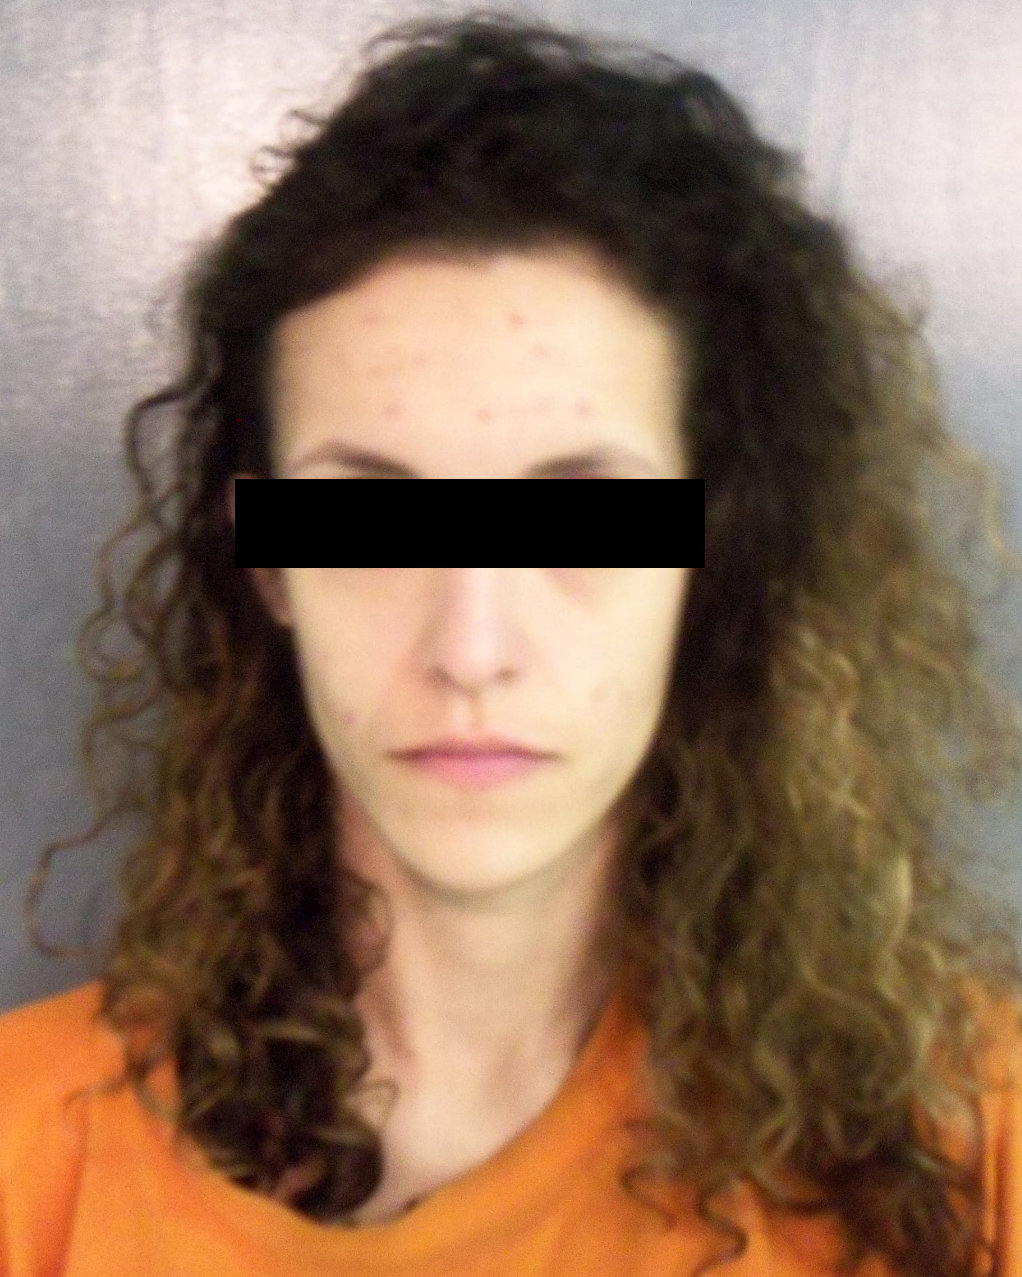 Police photo of victim, Rachel, from a prostitution arrest in Gloucester County, VA